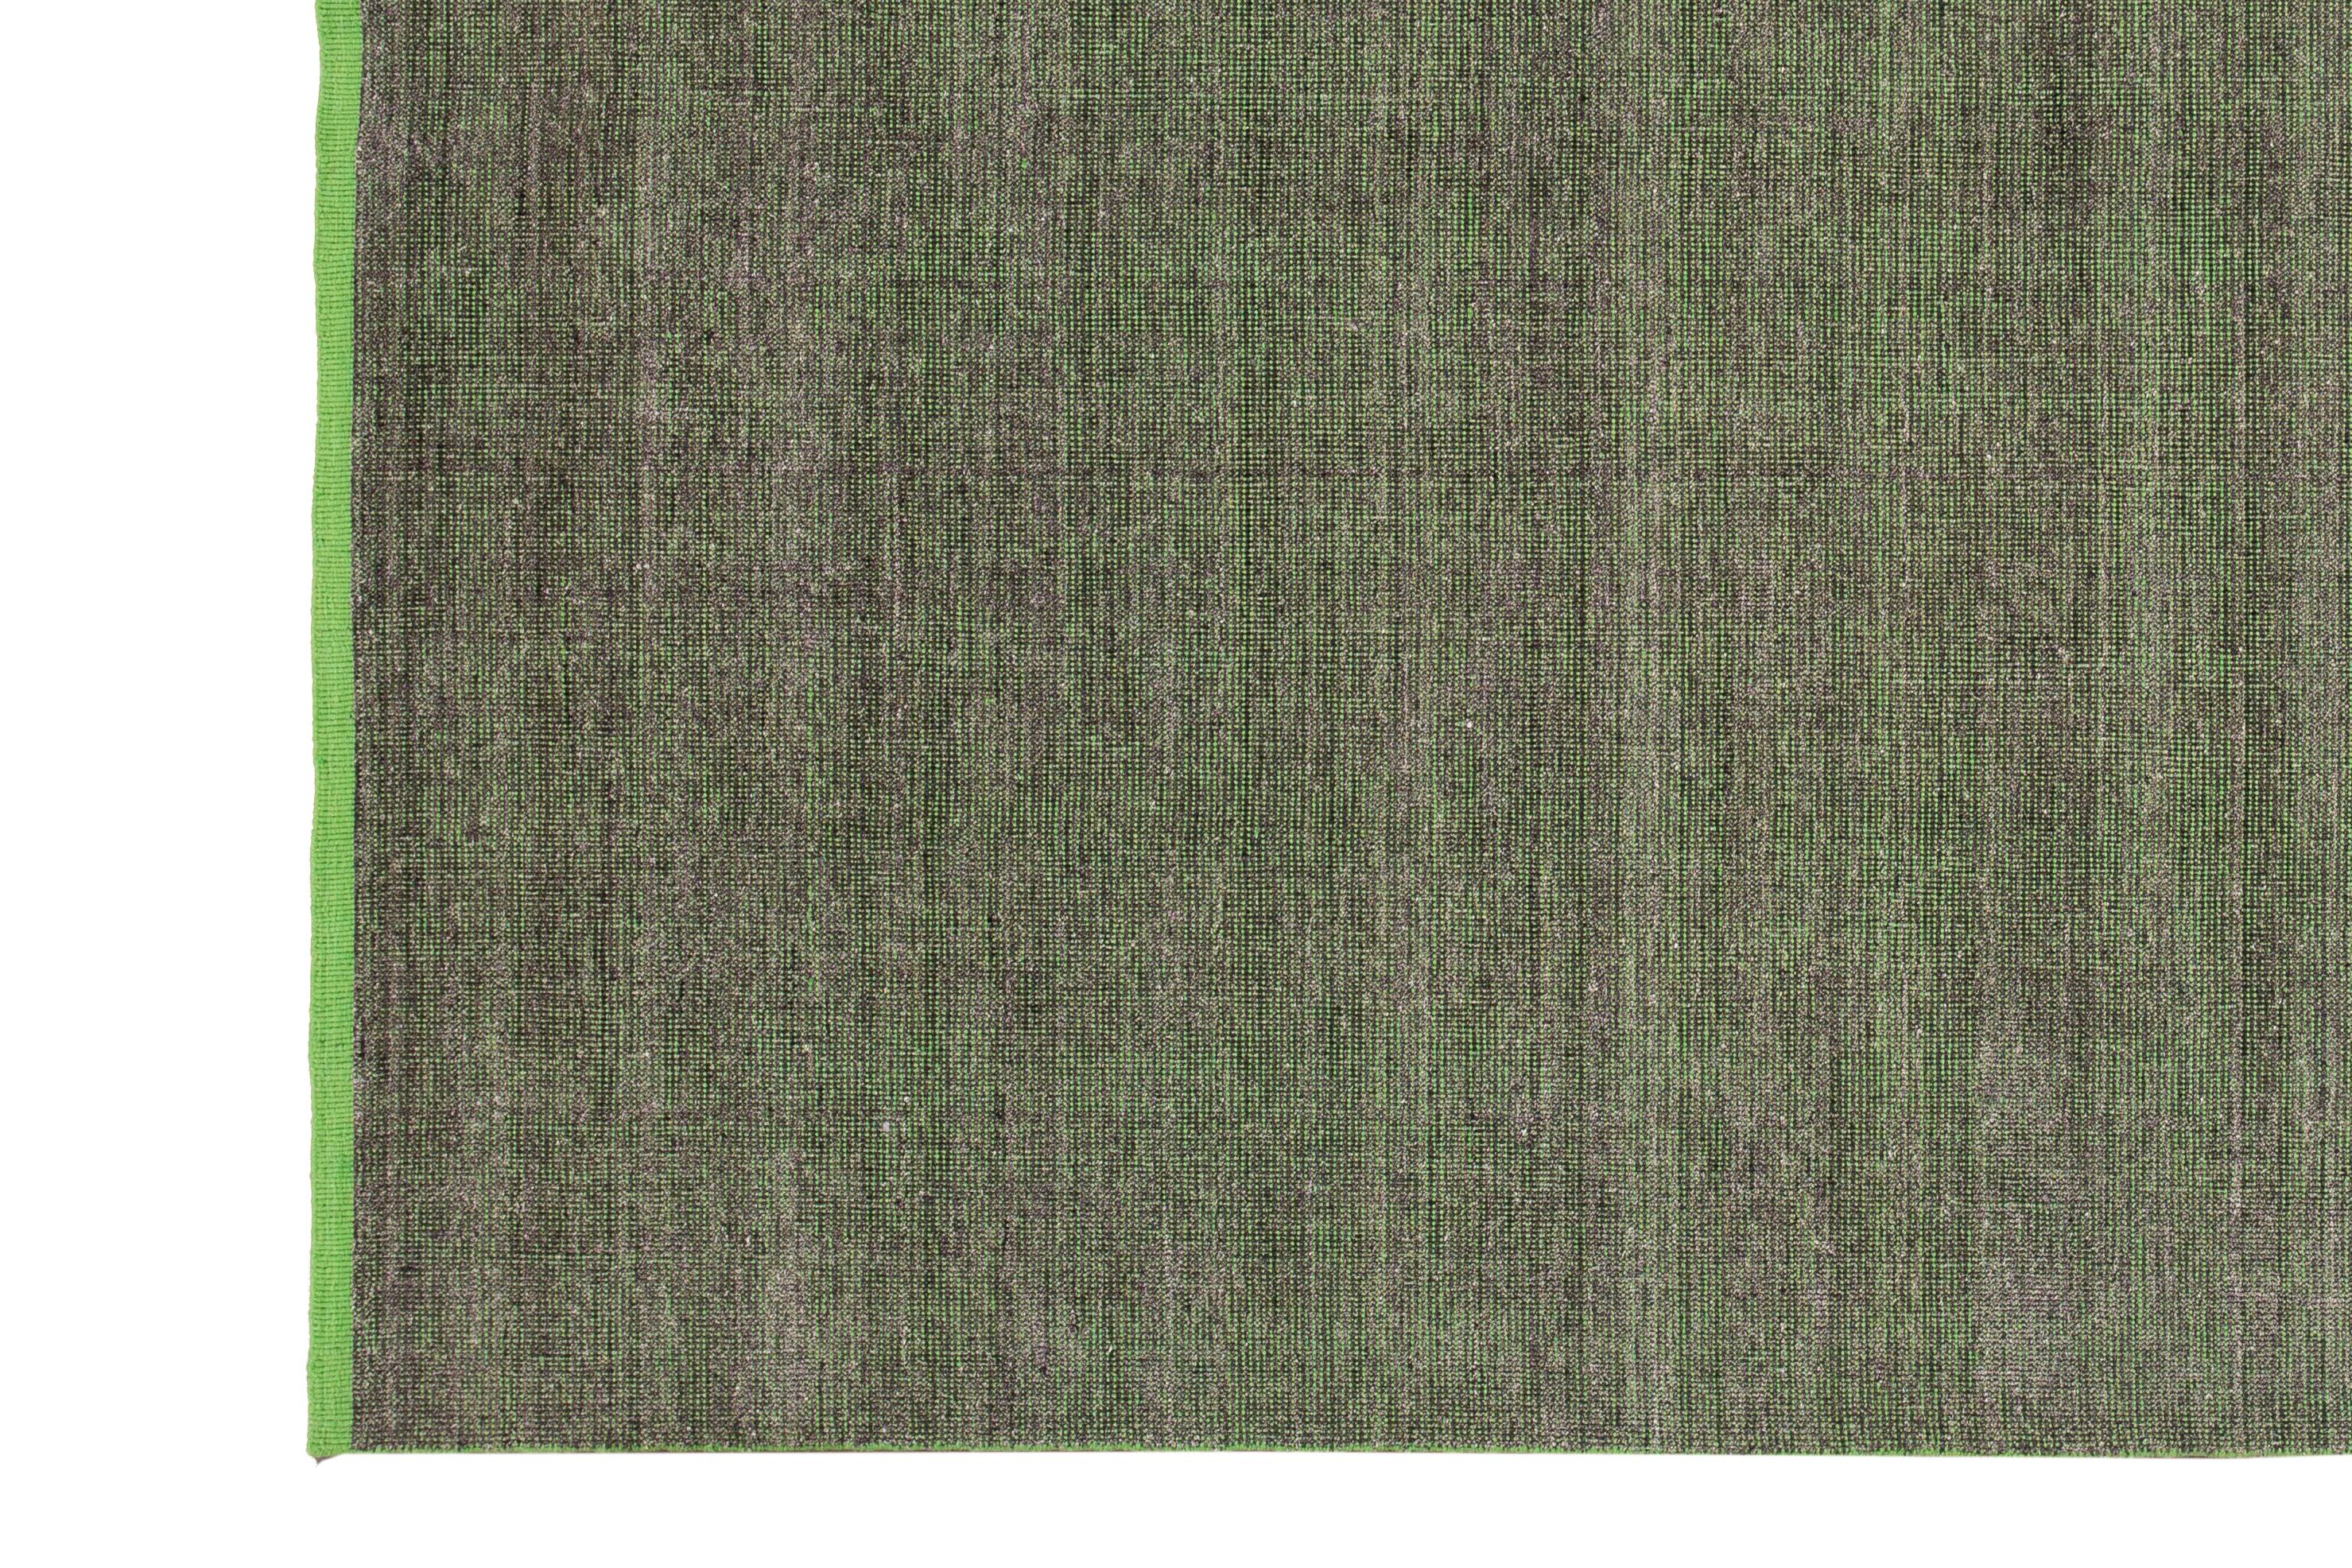 Beautiful modern handmade Indian bamboo and silk boho rug with a gray and green field. This Boho Collection Rug has a green border in an all-over solid design.

This rug measures: 9'0